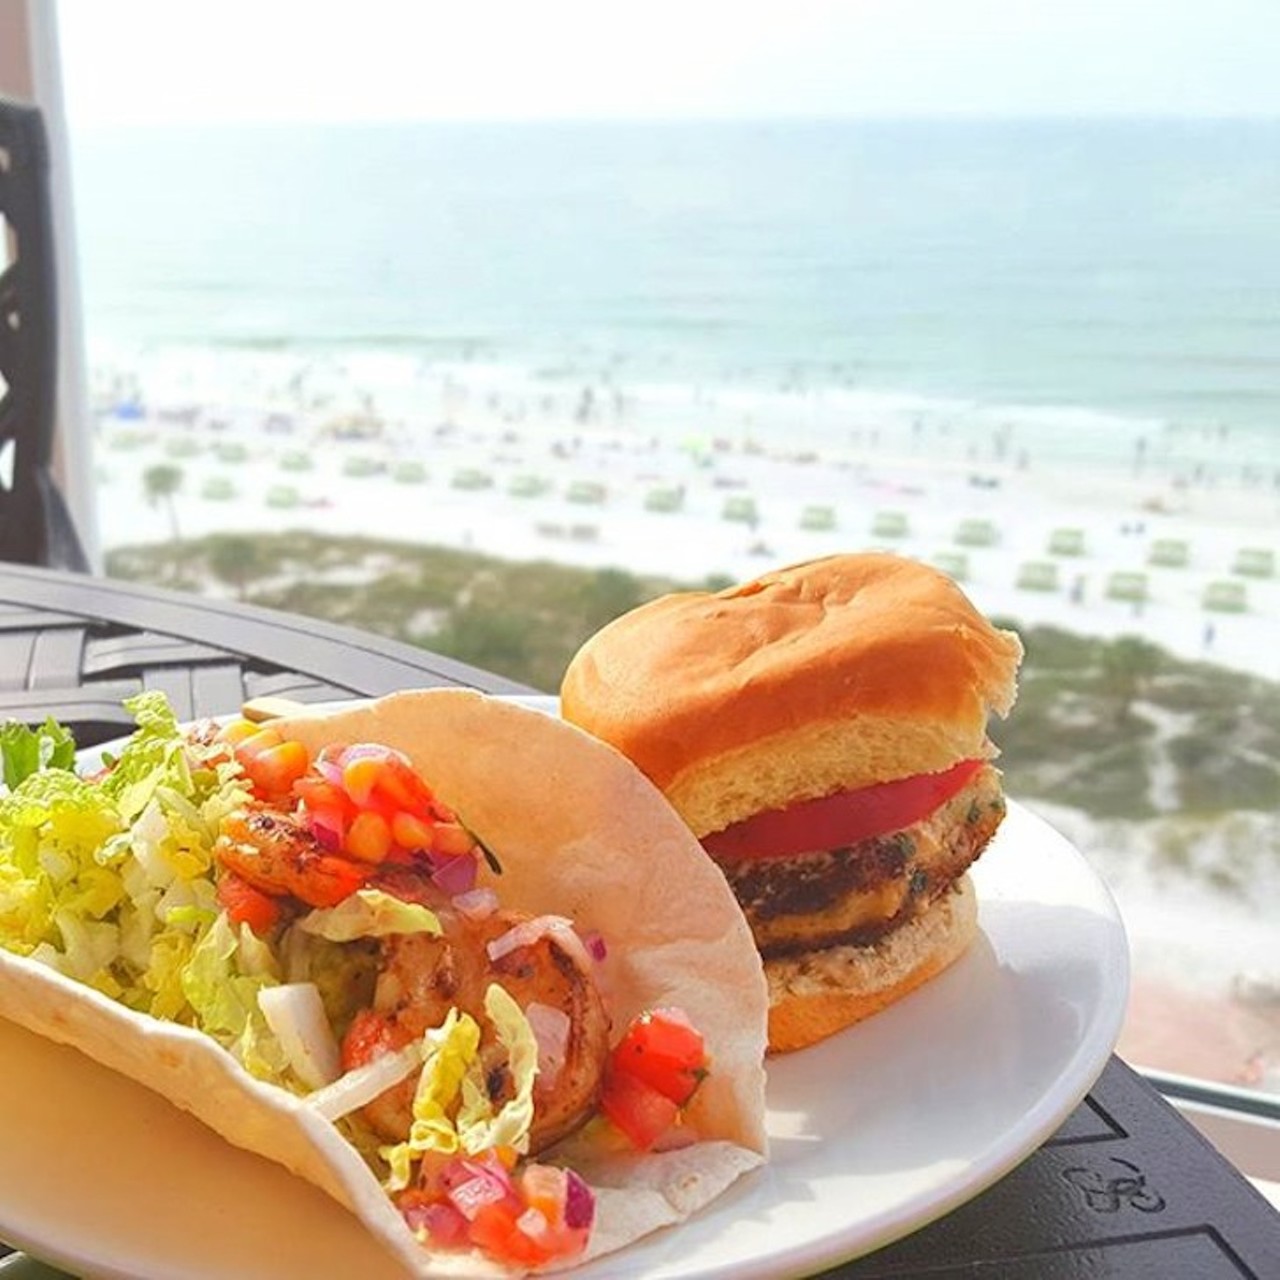 SHOR American Seafood Grill
301 South Gulfview Blvd., Clearwater | 727-373-4780
Distance from Orlando: 2 hours, 5 minutes
If you&#146;re tired of resorting to tiki bars and surf shacks for beach dining, give SHOR inside the Hyatt hotel a try. You&#146;ll still get the amazing beachfront views, but without the threat of sand blowing into your mahi mahi. 
Photo via lexisatthebeach/Instagram